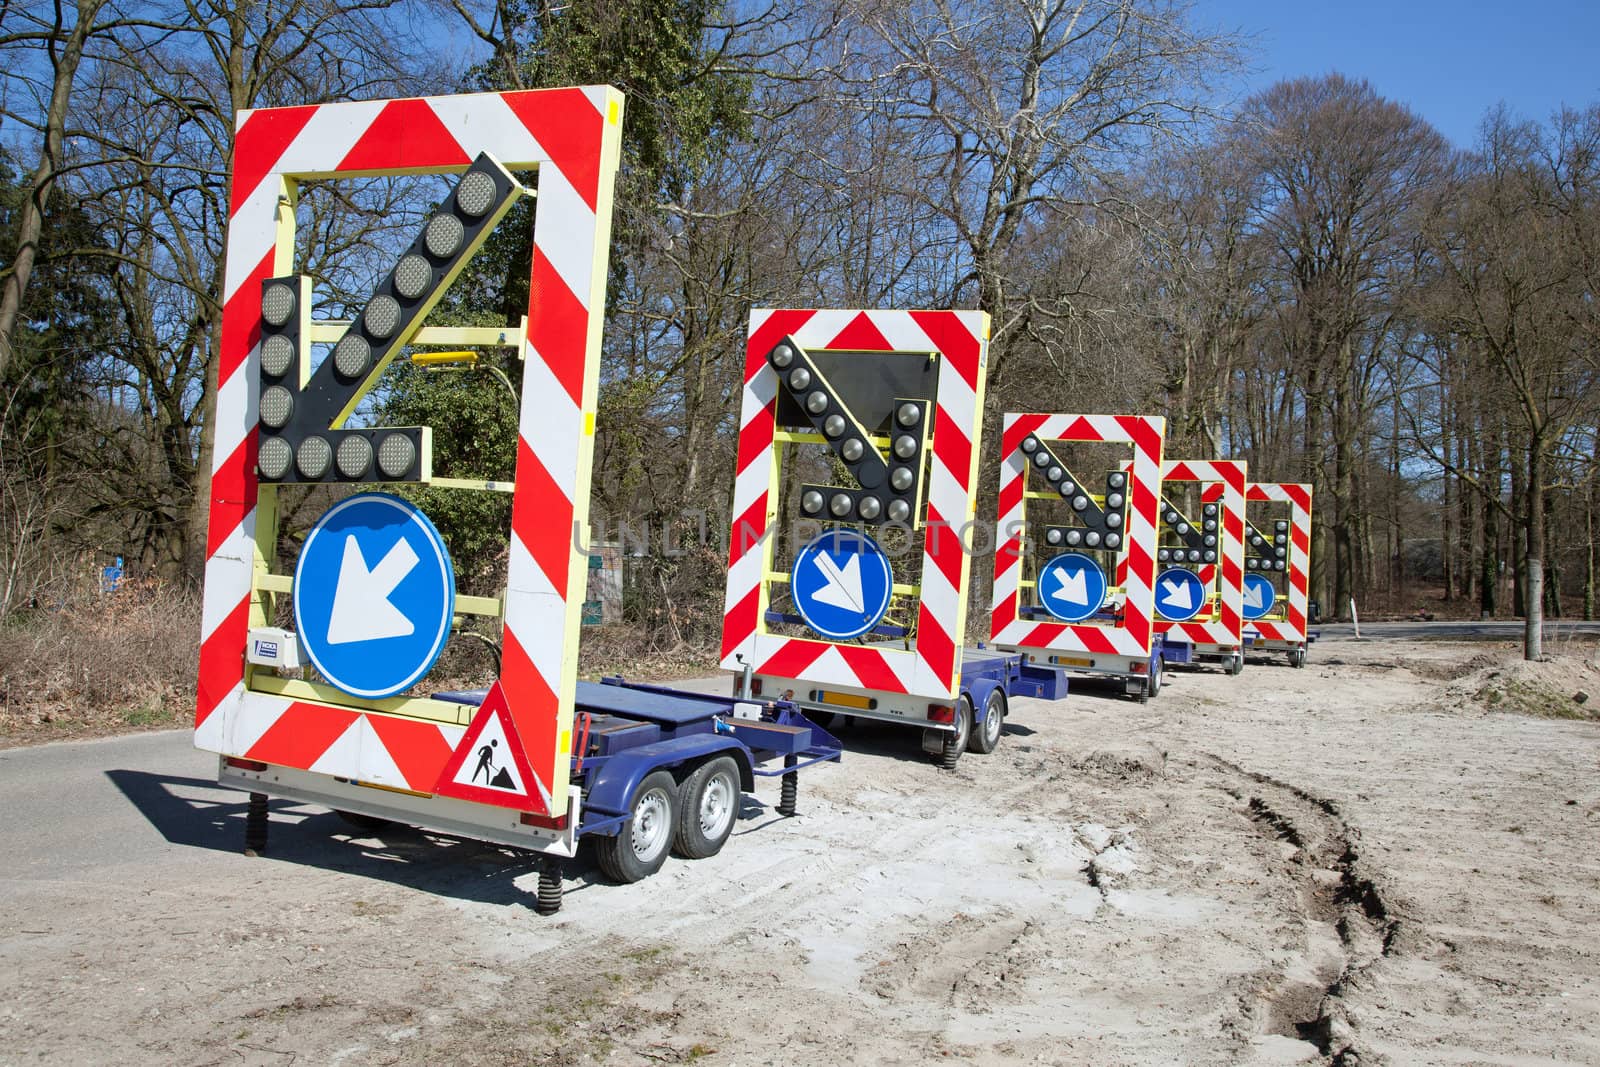 row of traffic warning signs and arrows on trailers